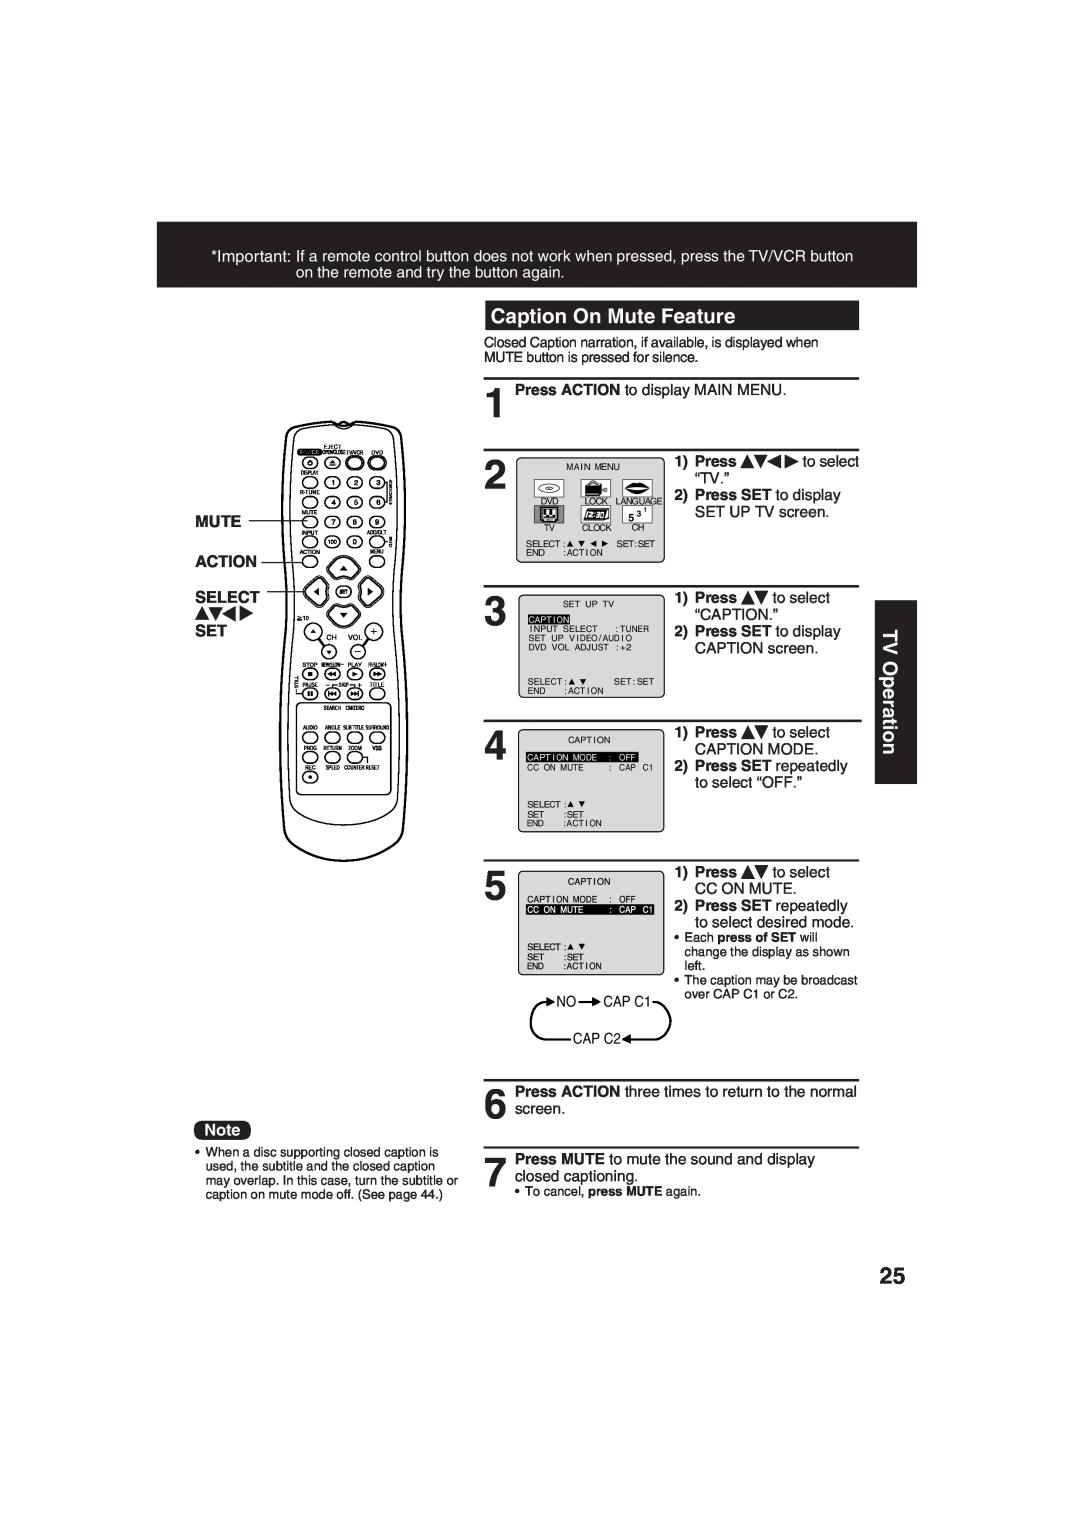 Panasonic PV-DF273, PV-DF203 manual Caption On Mute Feature, Mute Action Select Set, TV Operation, Press SET to display 